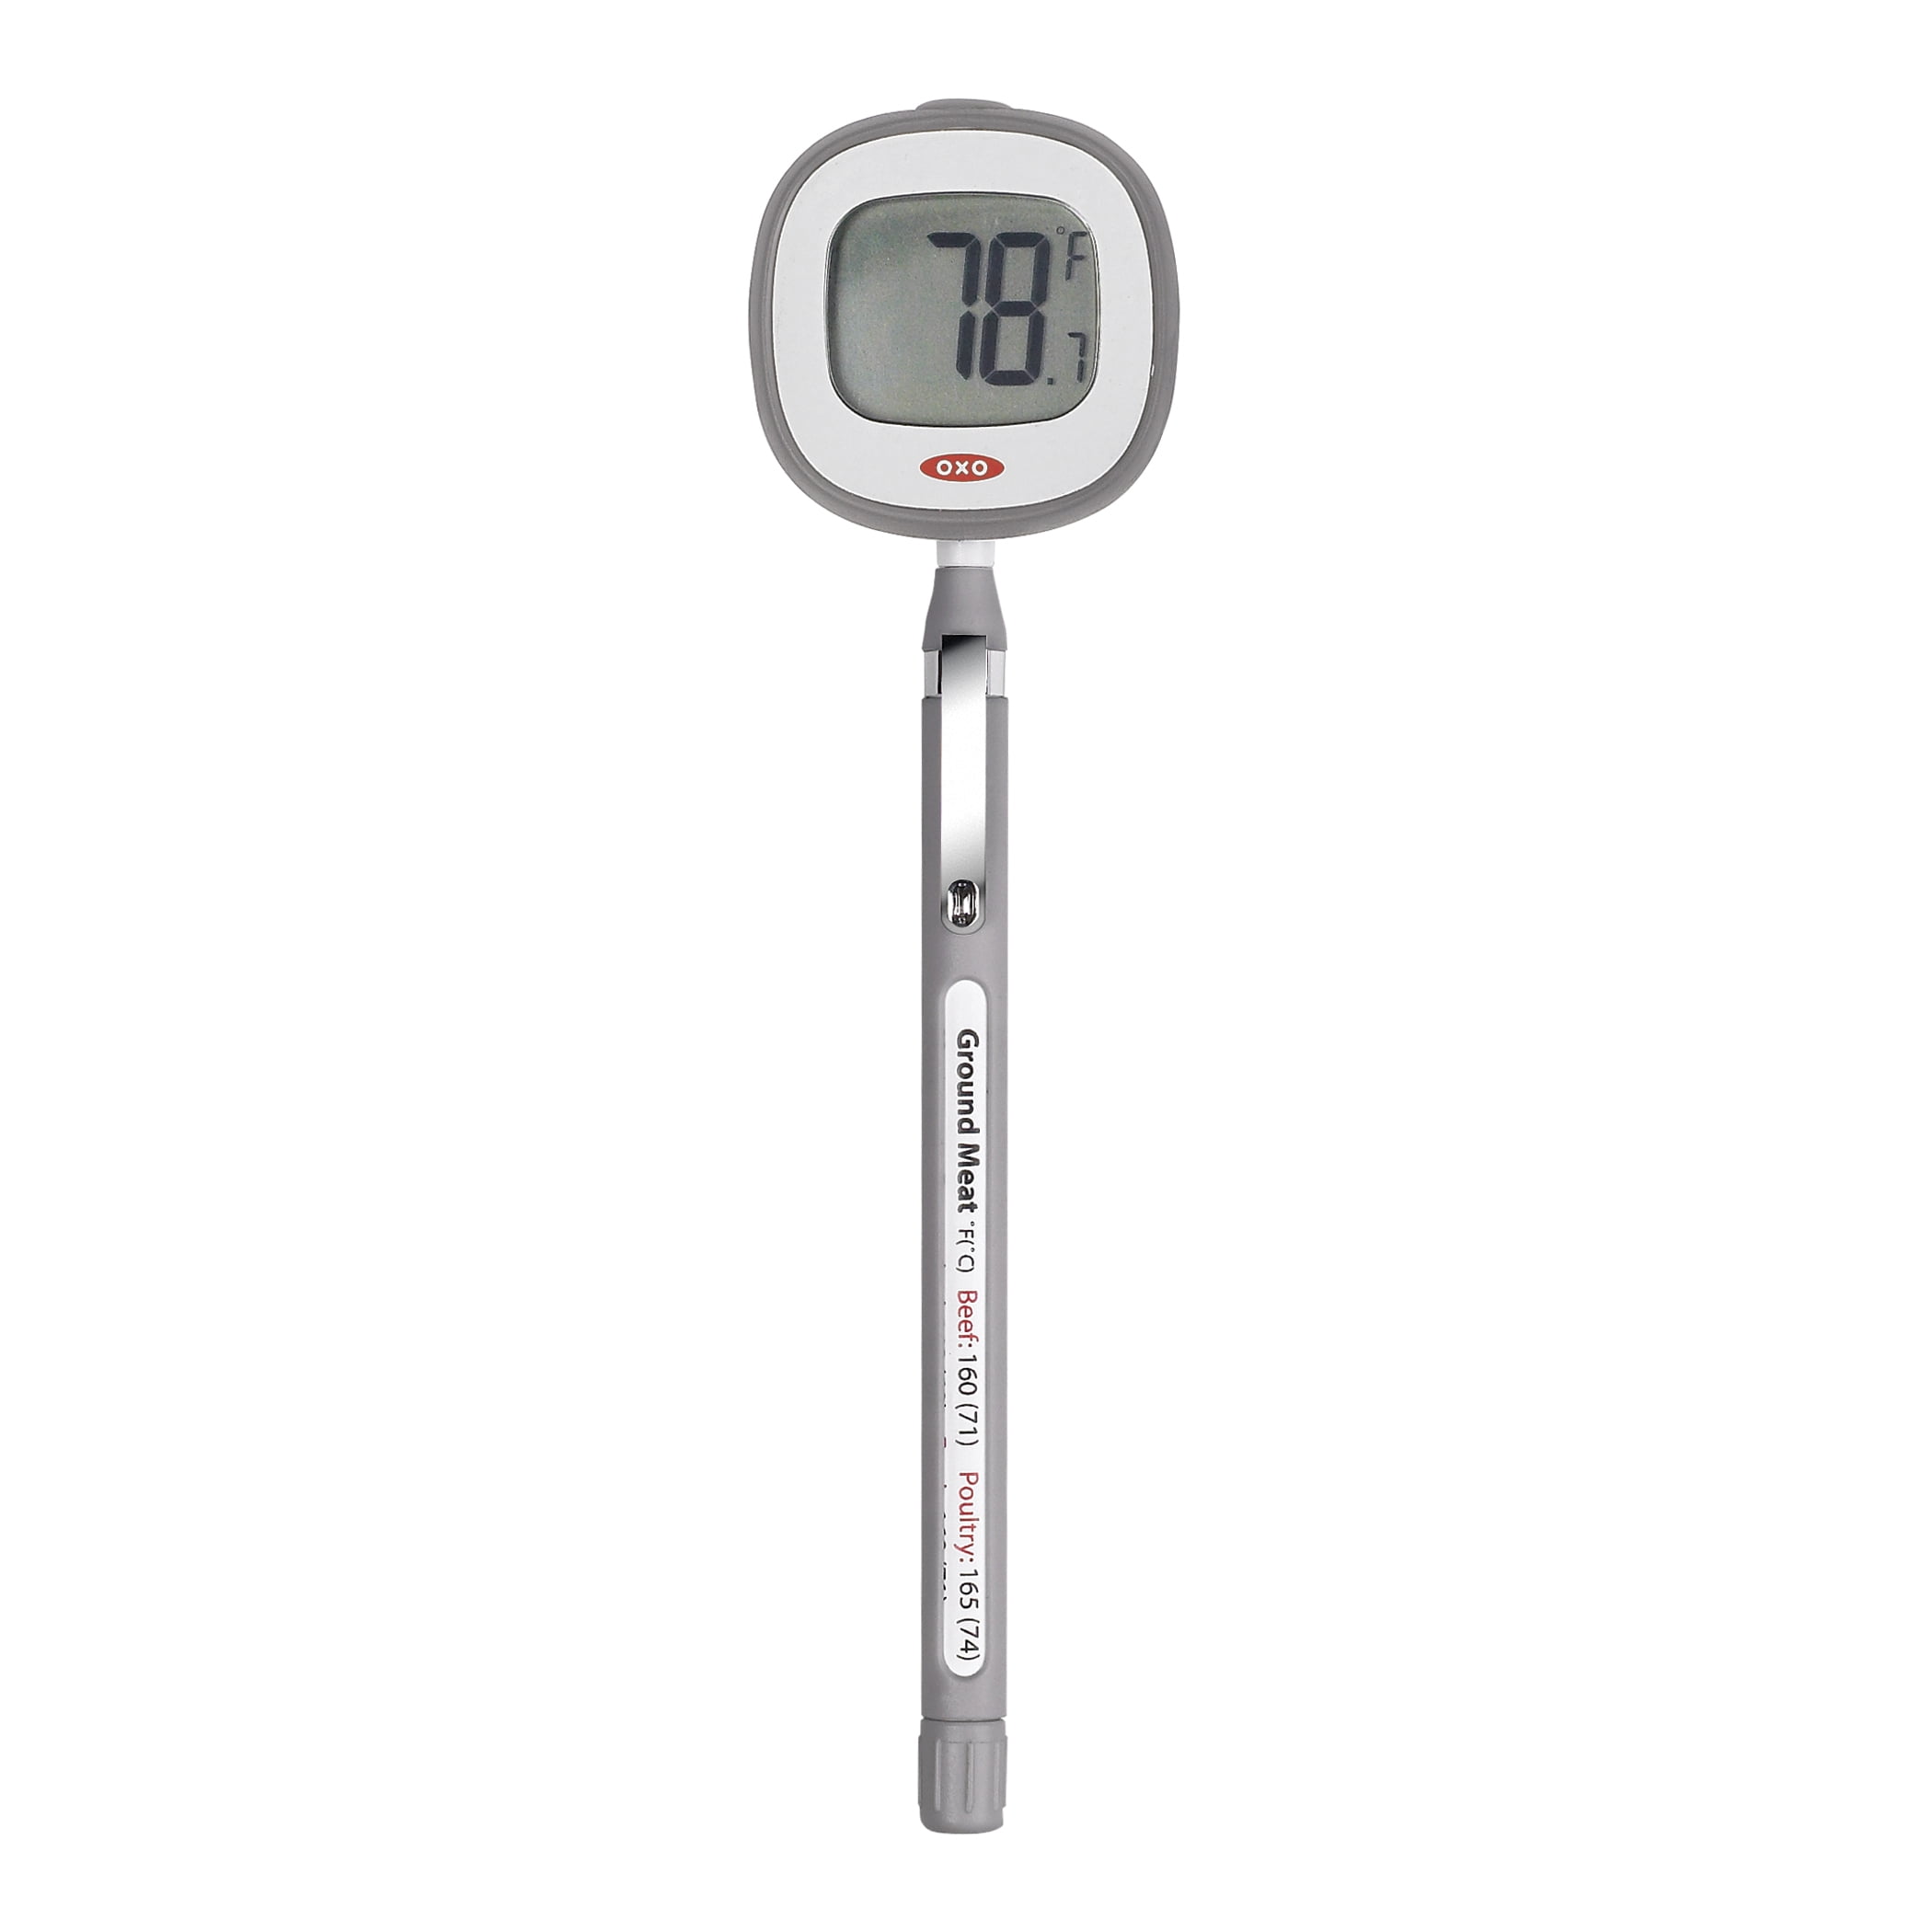 OXO Good Grips Instant Read Thermometer - KnifeCenter - OXO1051393 -  Discontinued